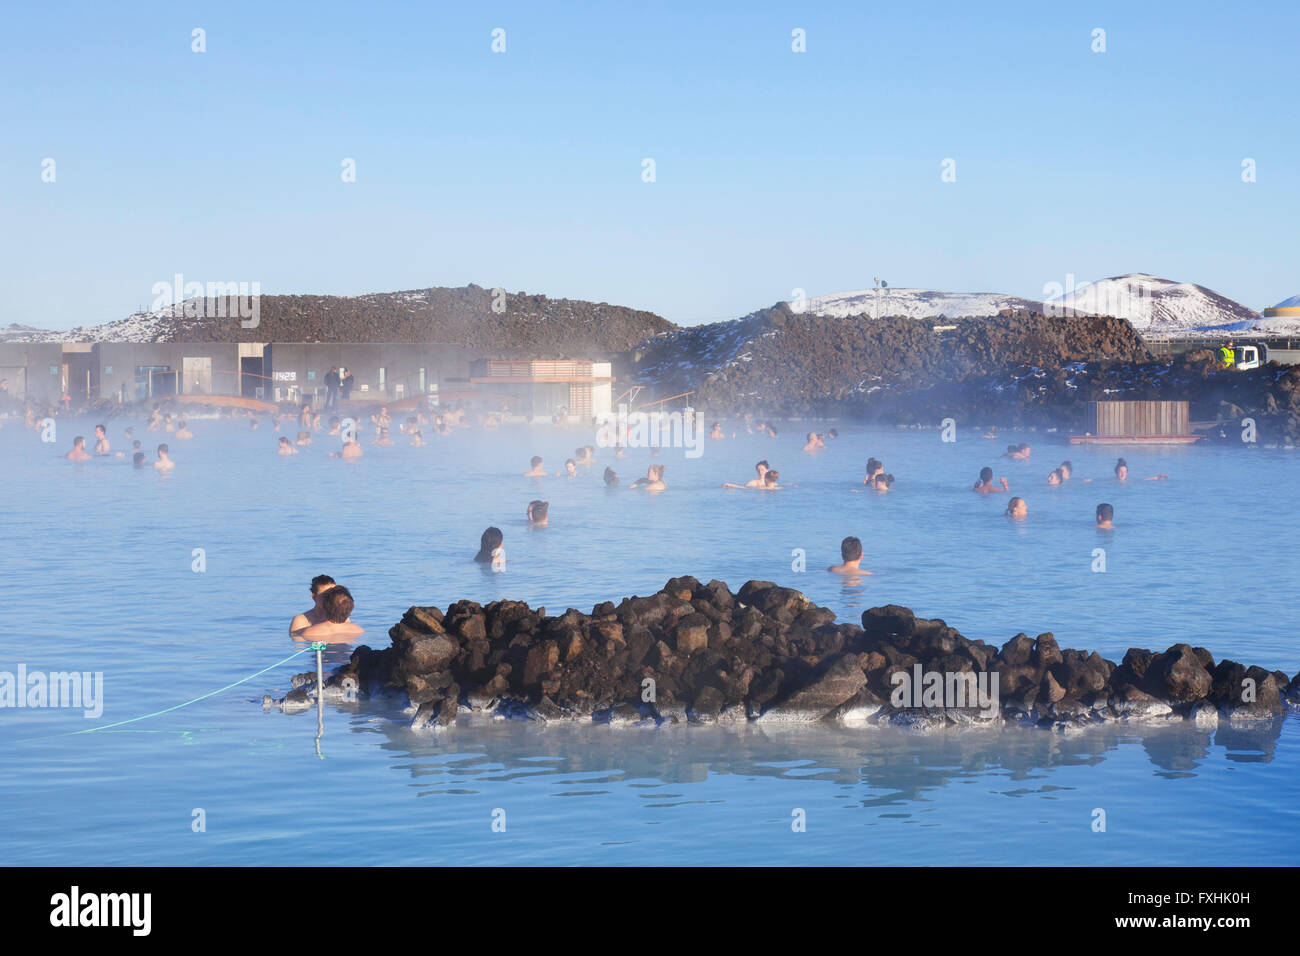 Tourists bathing in Blue Lagoon, rich in minerals like silica and sulfur in winter, Grindavík, Reykjanes Peninsula, Iceland Stock Photo